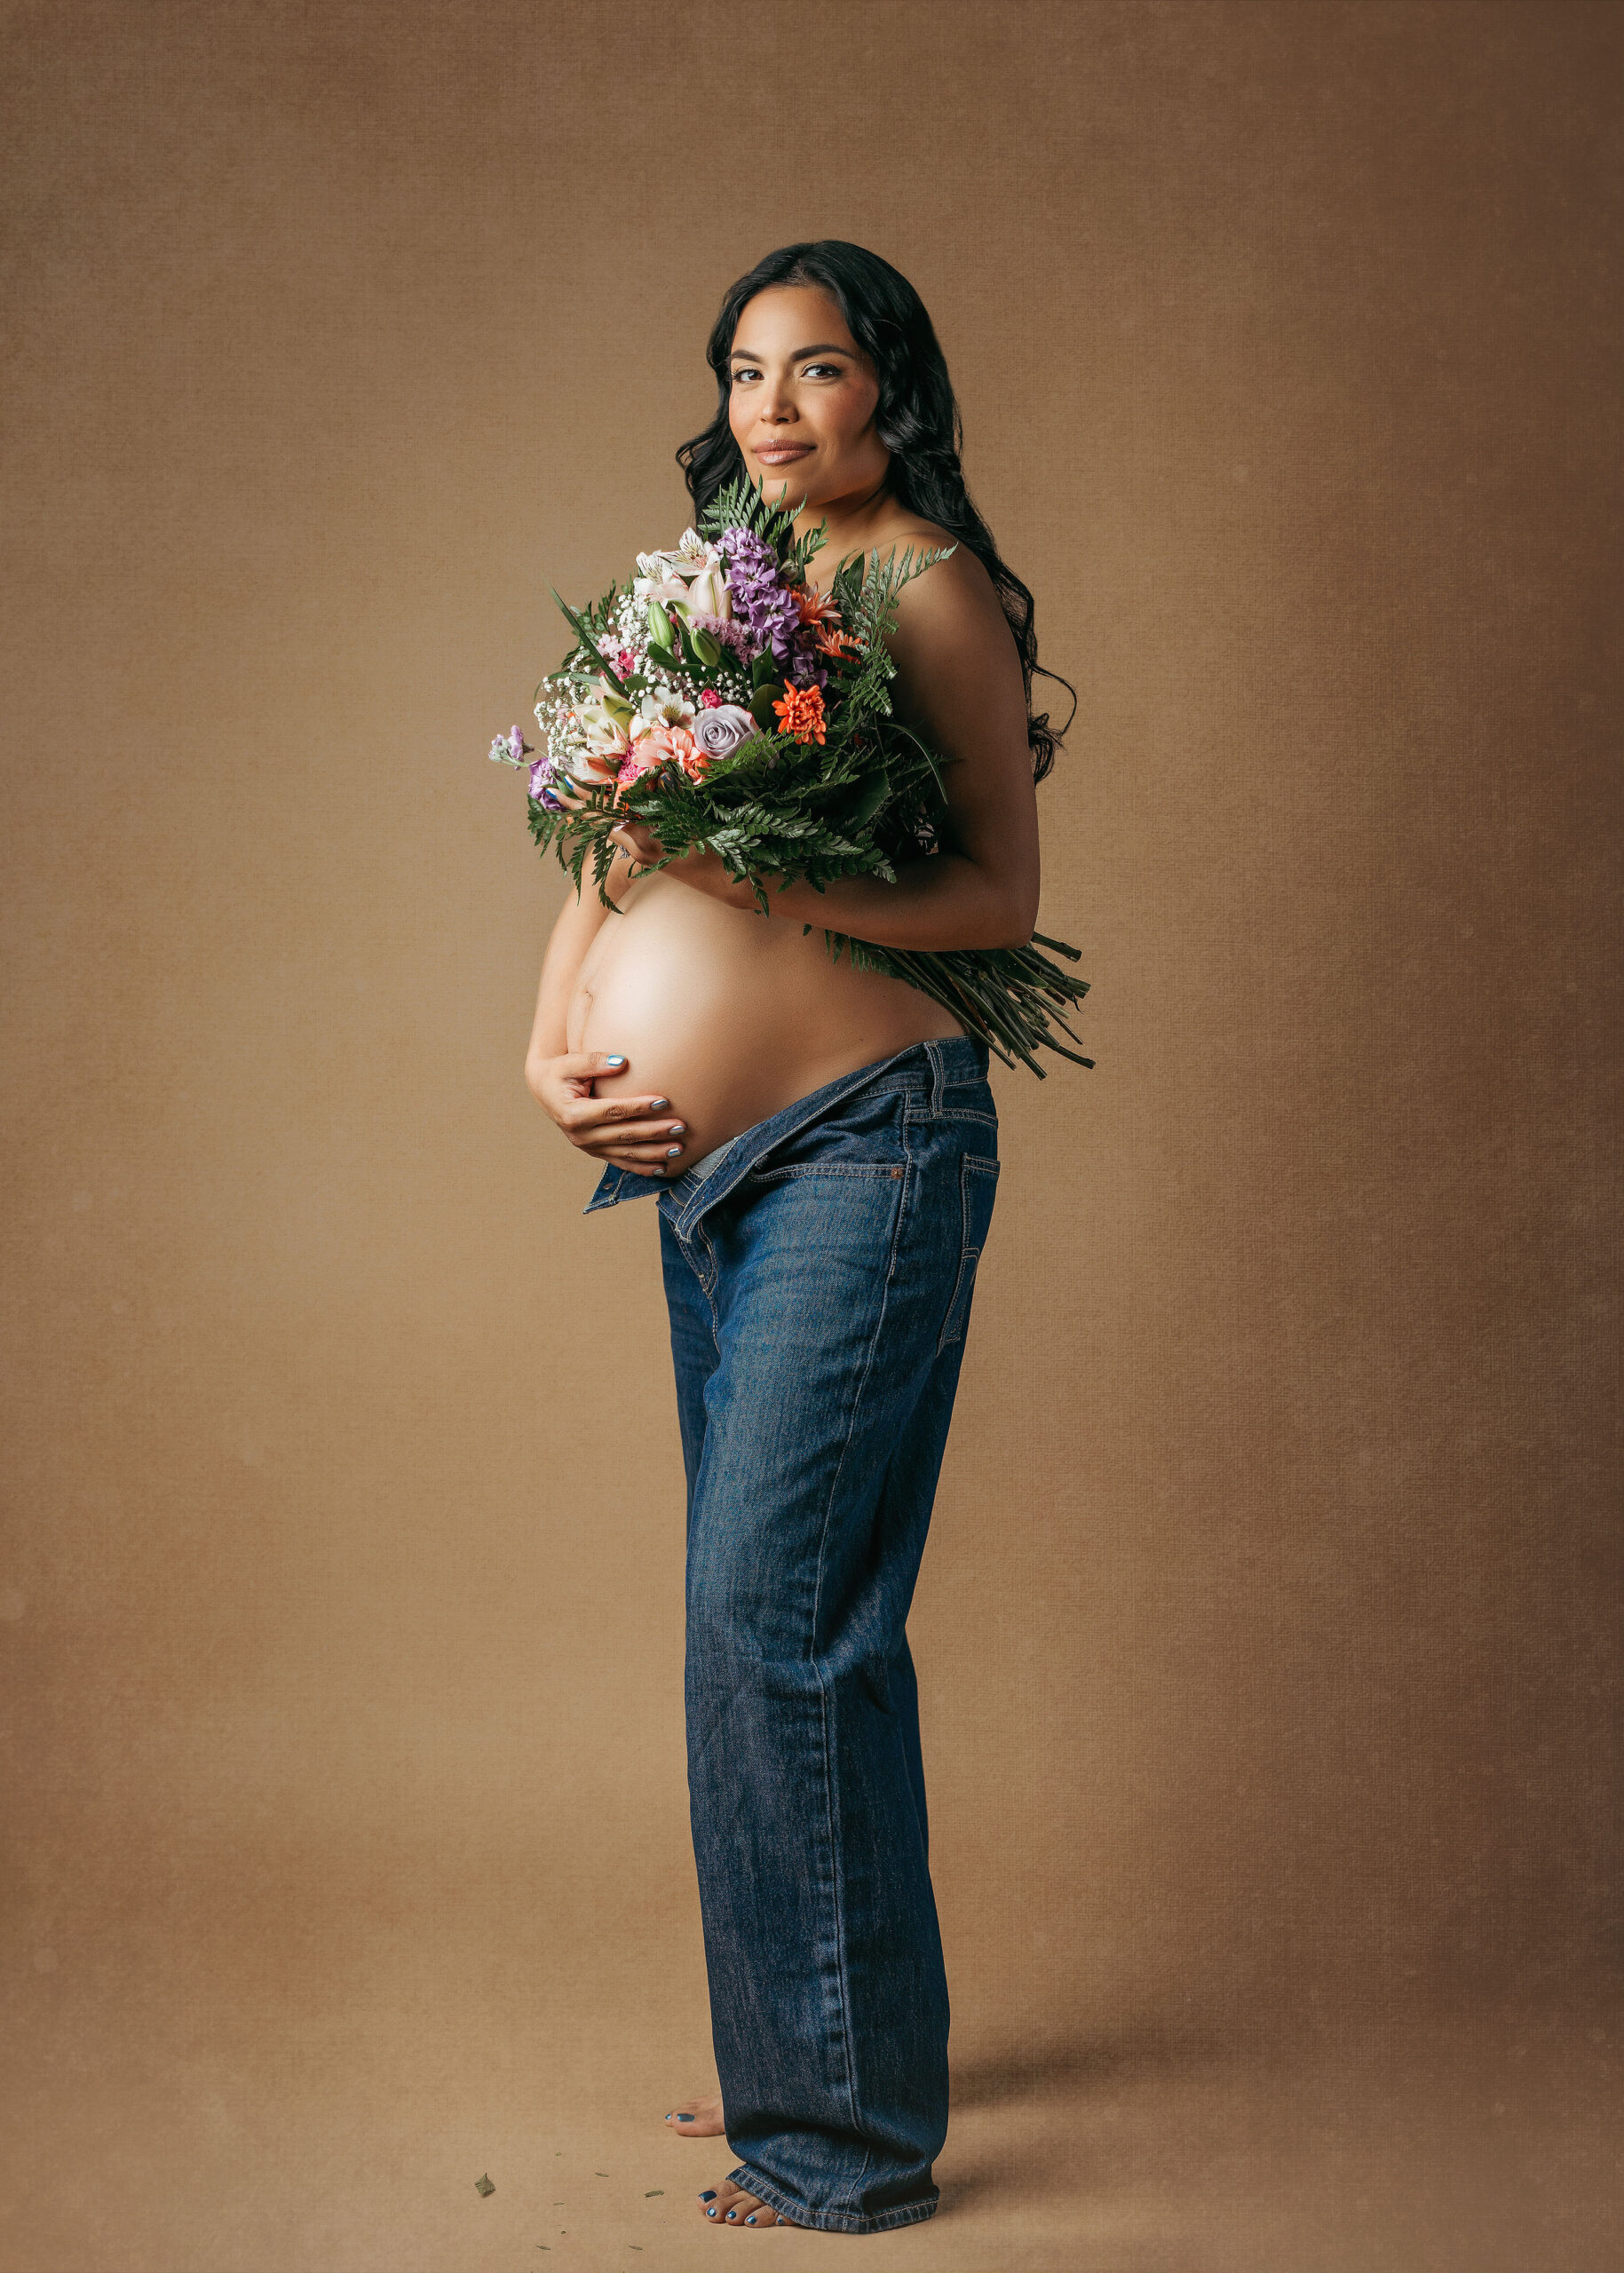 photo of pregnant woman standing wearing unzipped blue jeans, no top and holding a bouquet of flowers that hide her breasts